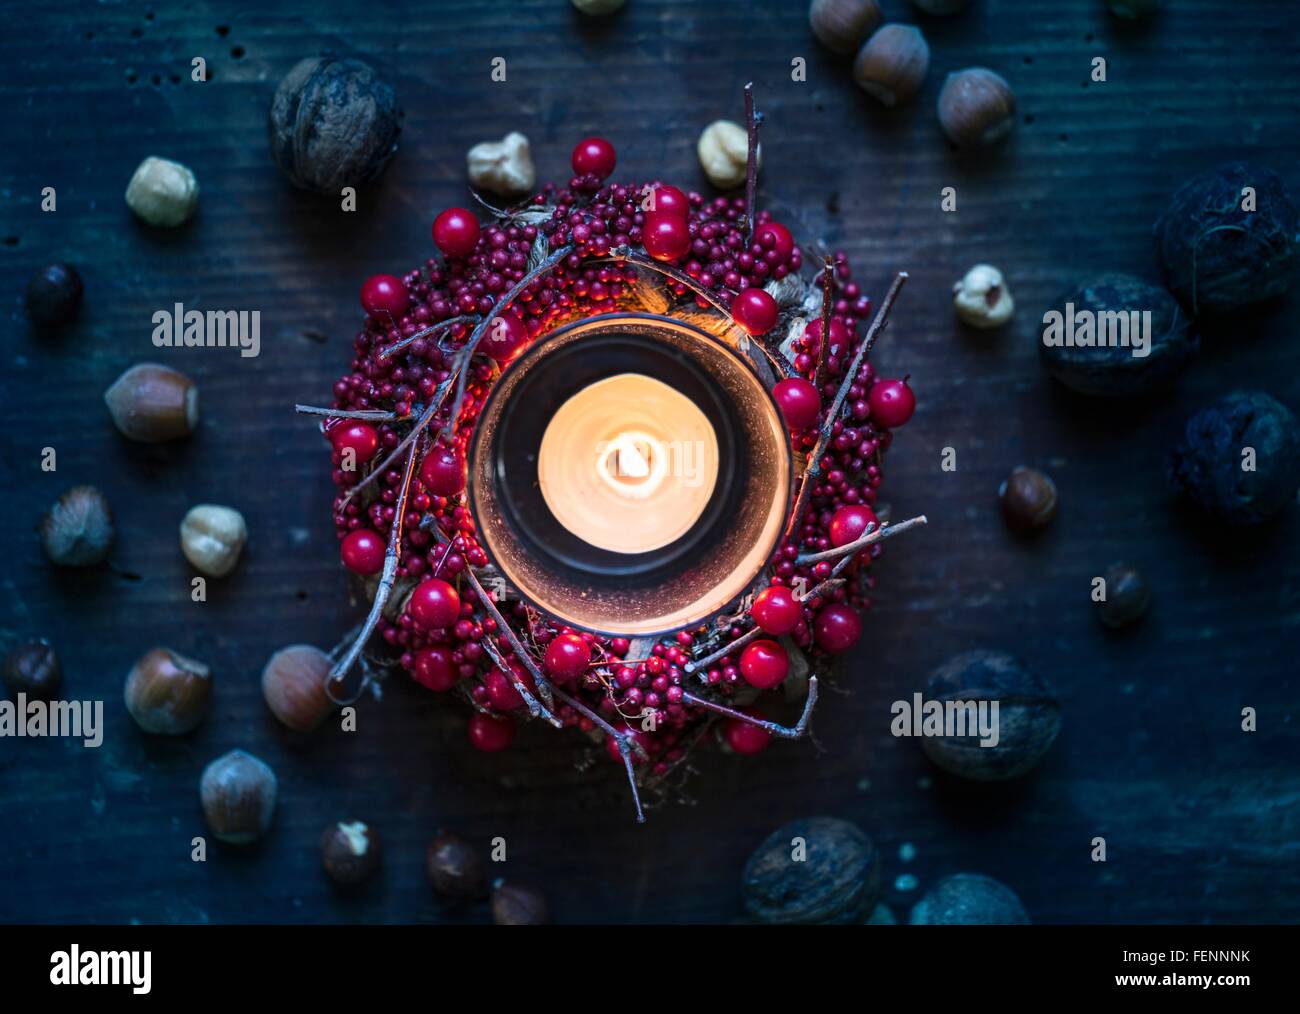 Overhead view of burning candle surrounded by berry wreath and nuts Stock Photo